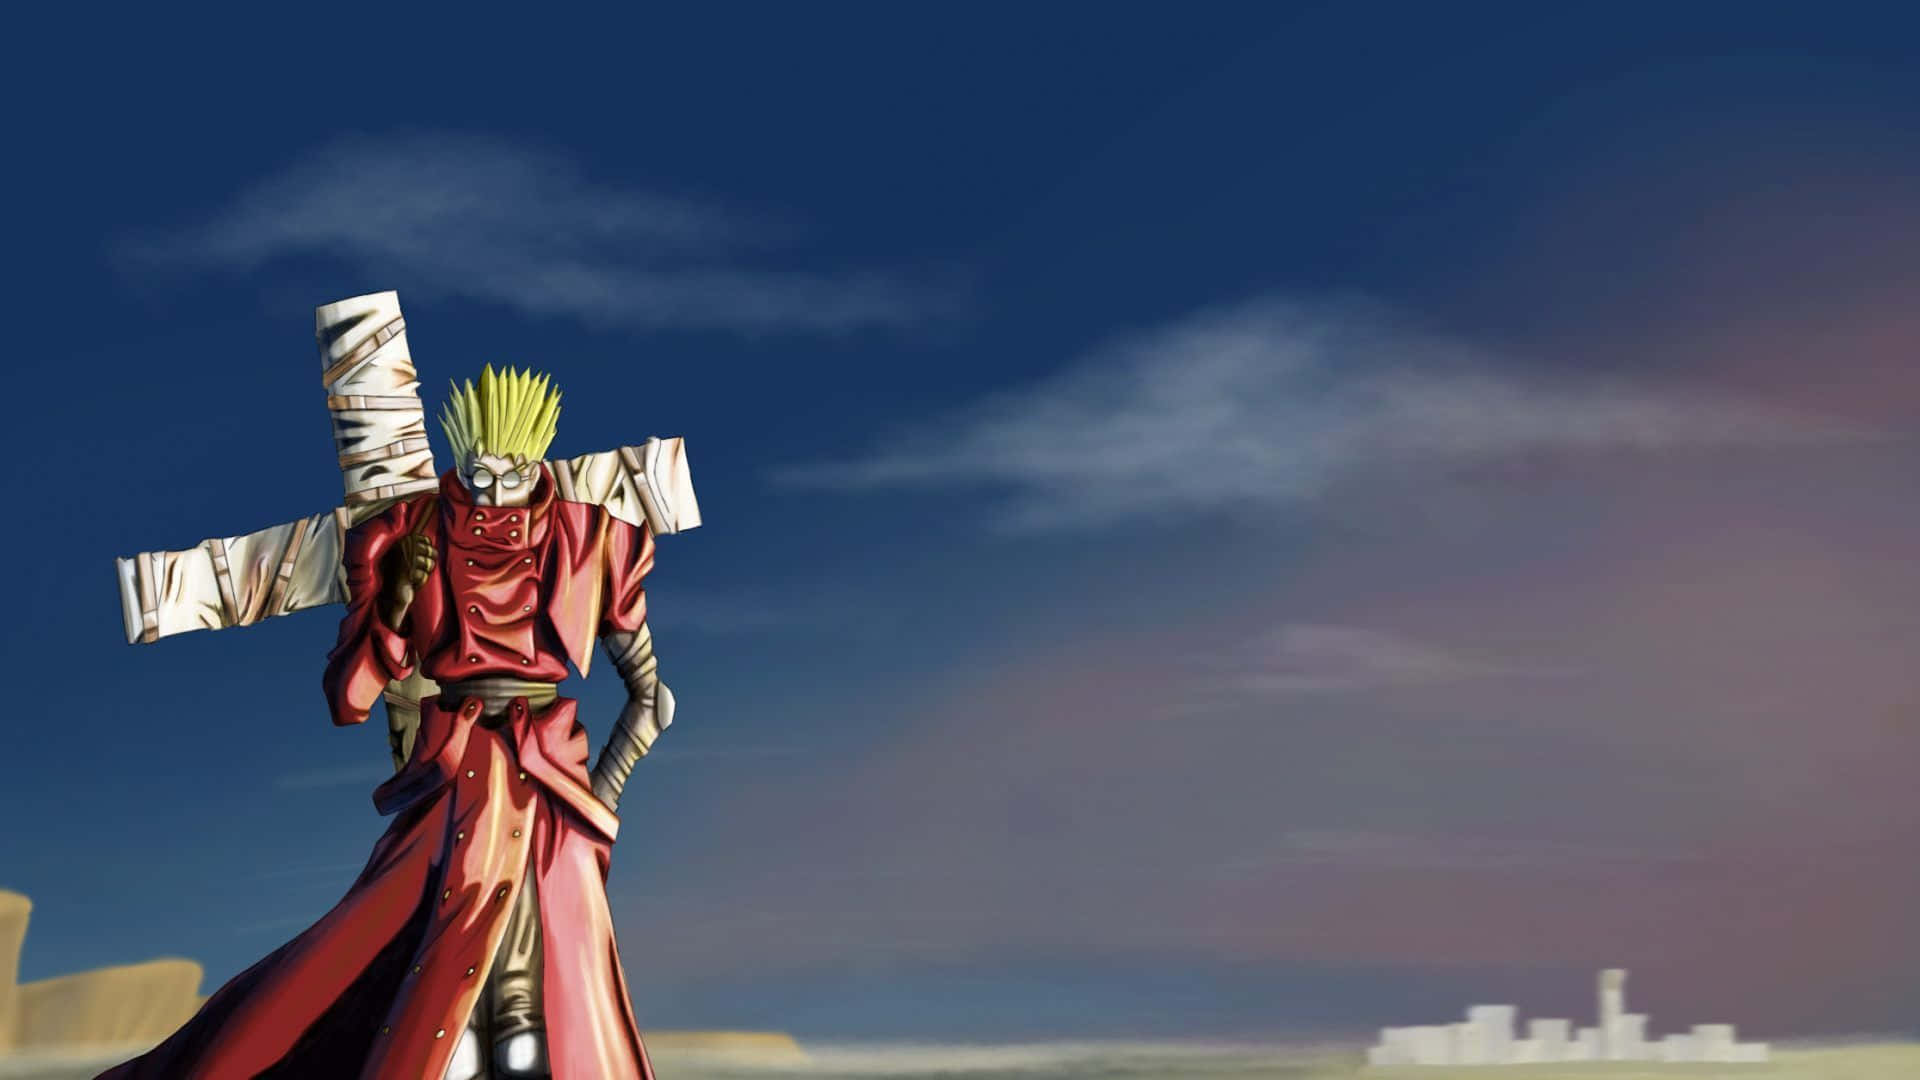 Vash the Stampede, a wandering pacifist with a bounty on his head